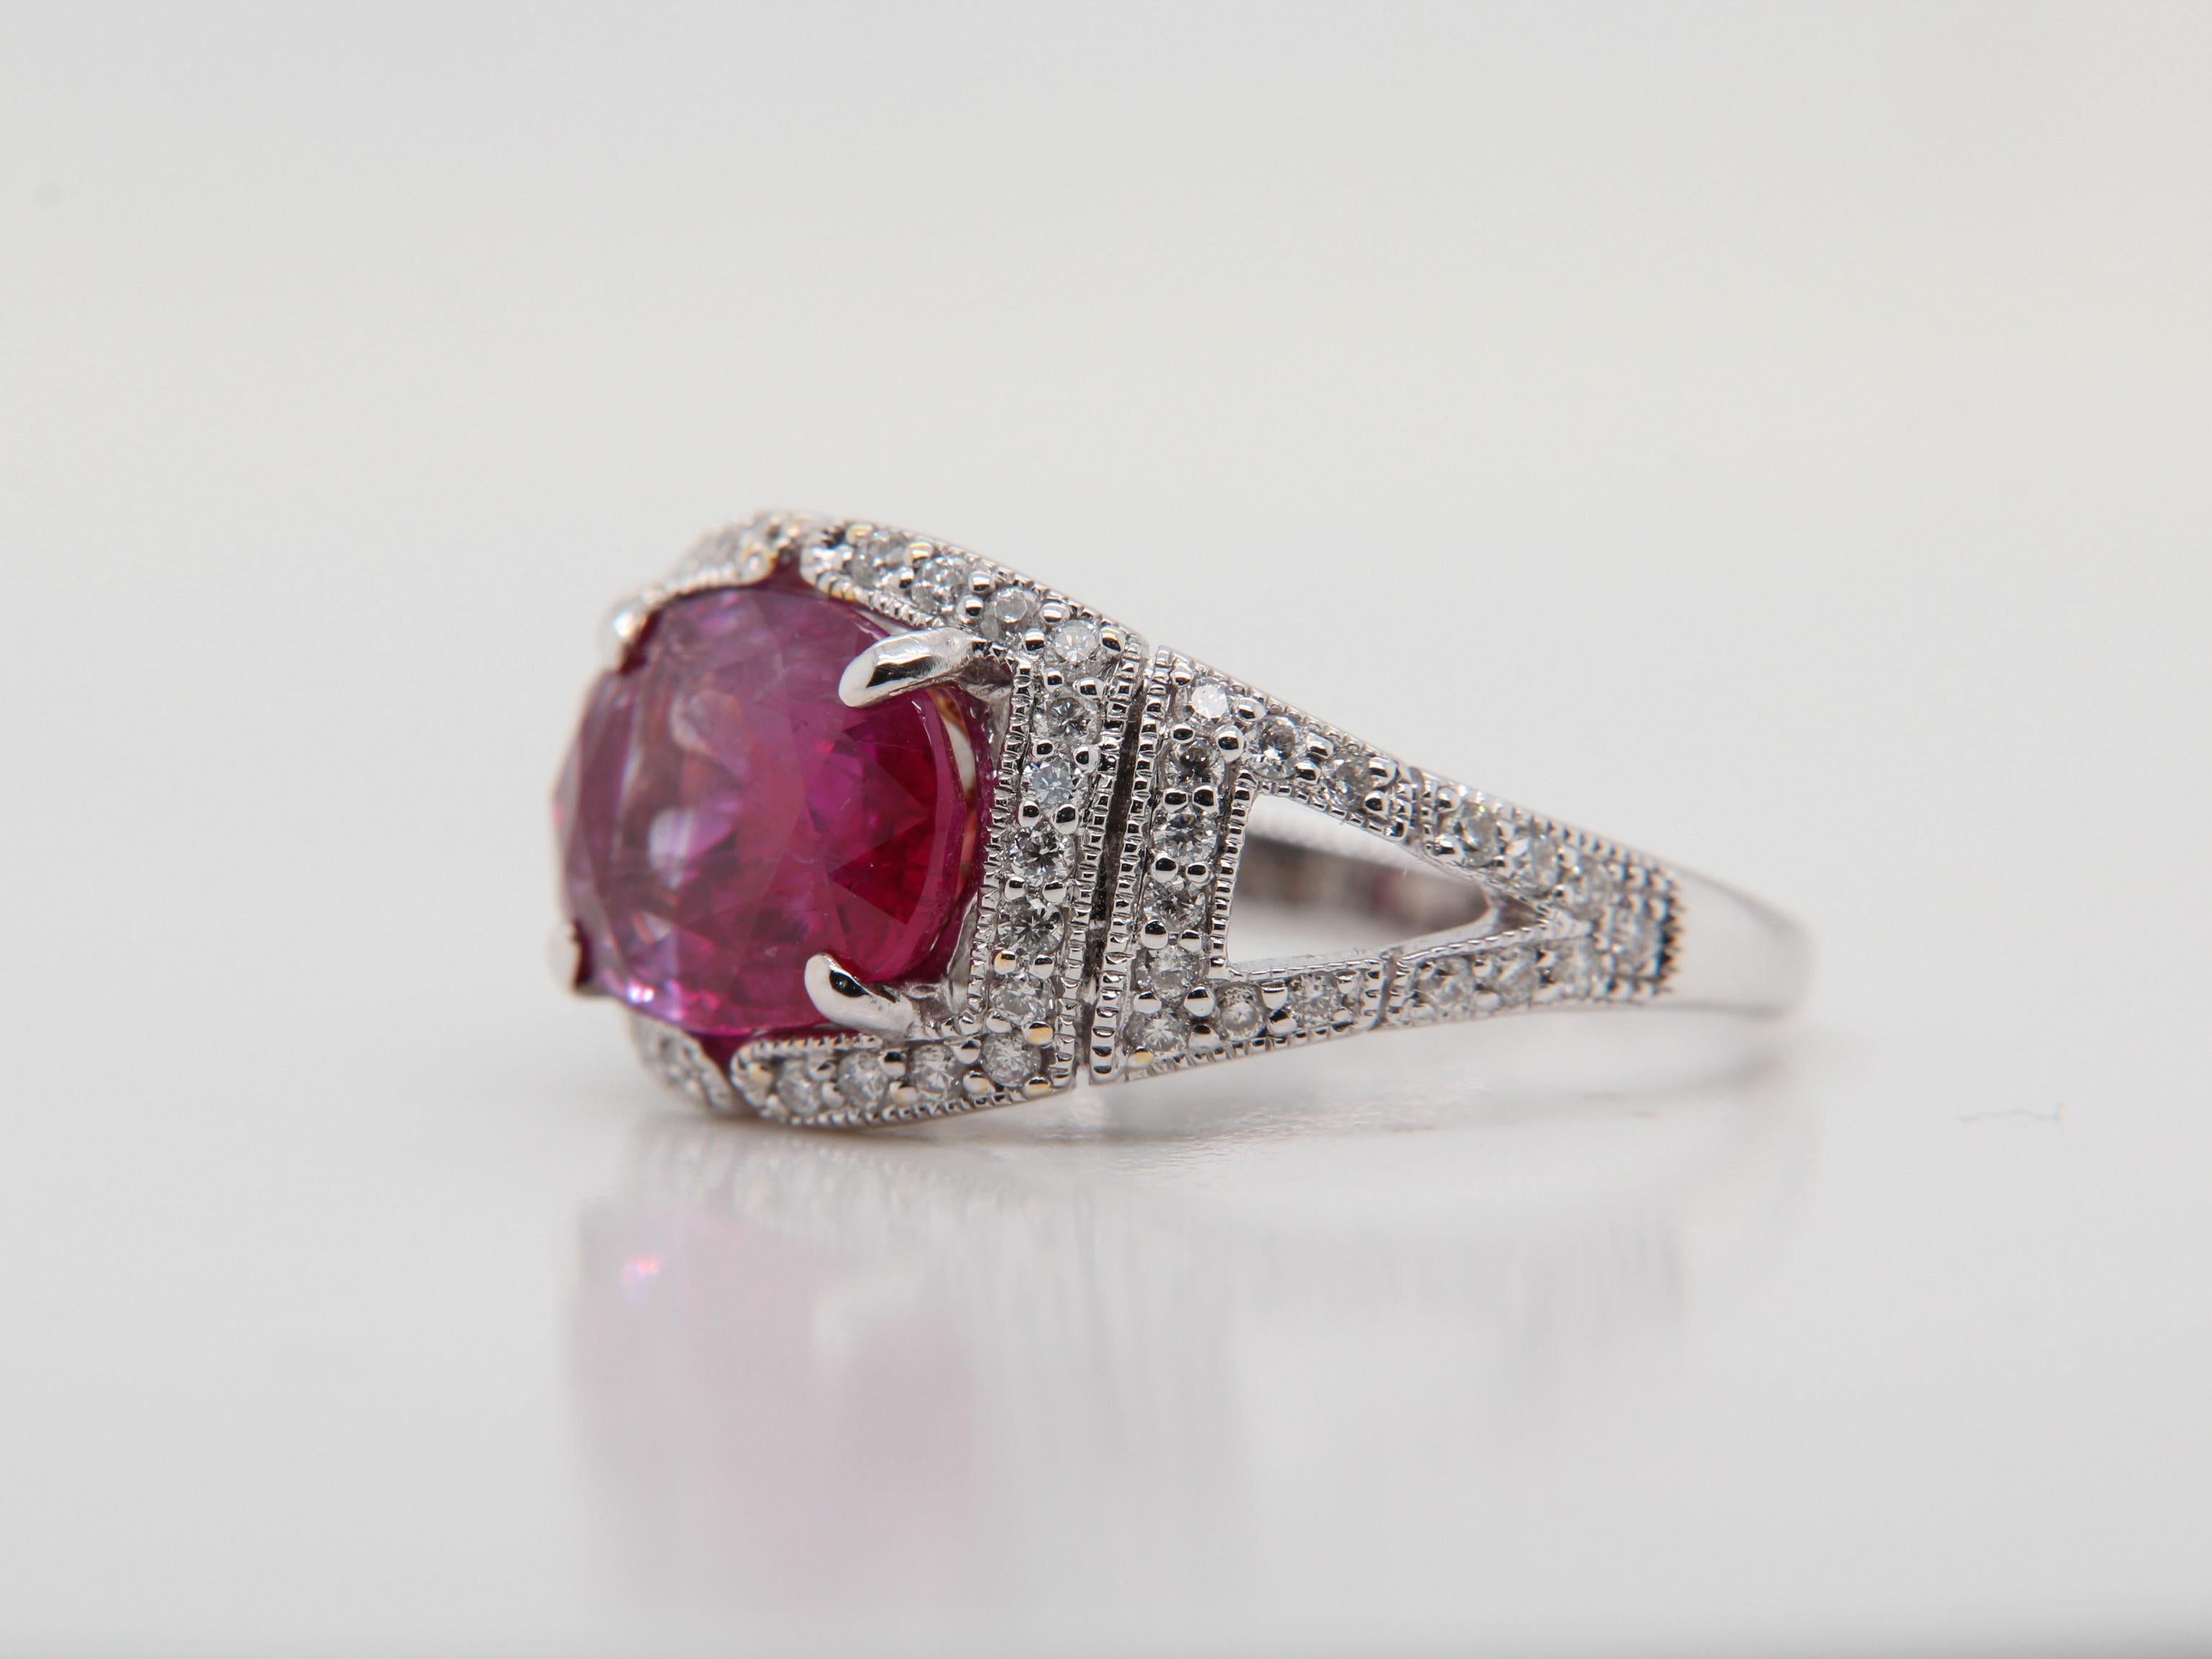 A brand new AGL (Thai) certified 3.56 burma ruby no heat purplish red and diamond ring in 18 karat gold . The ruby weigh 3.56 carat and diamond weigh 0.39 carat. The total ring weight is 4.87 grams. The ring size US 5.50 and EU 51.